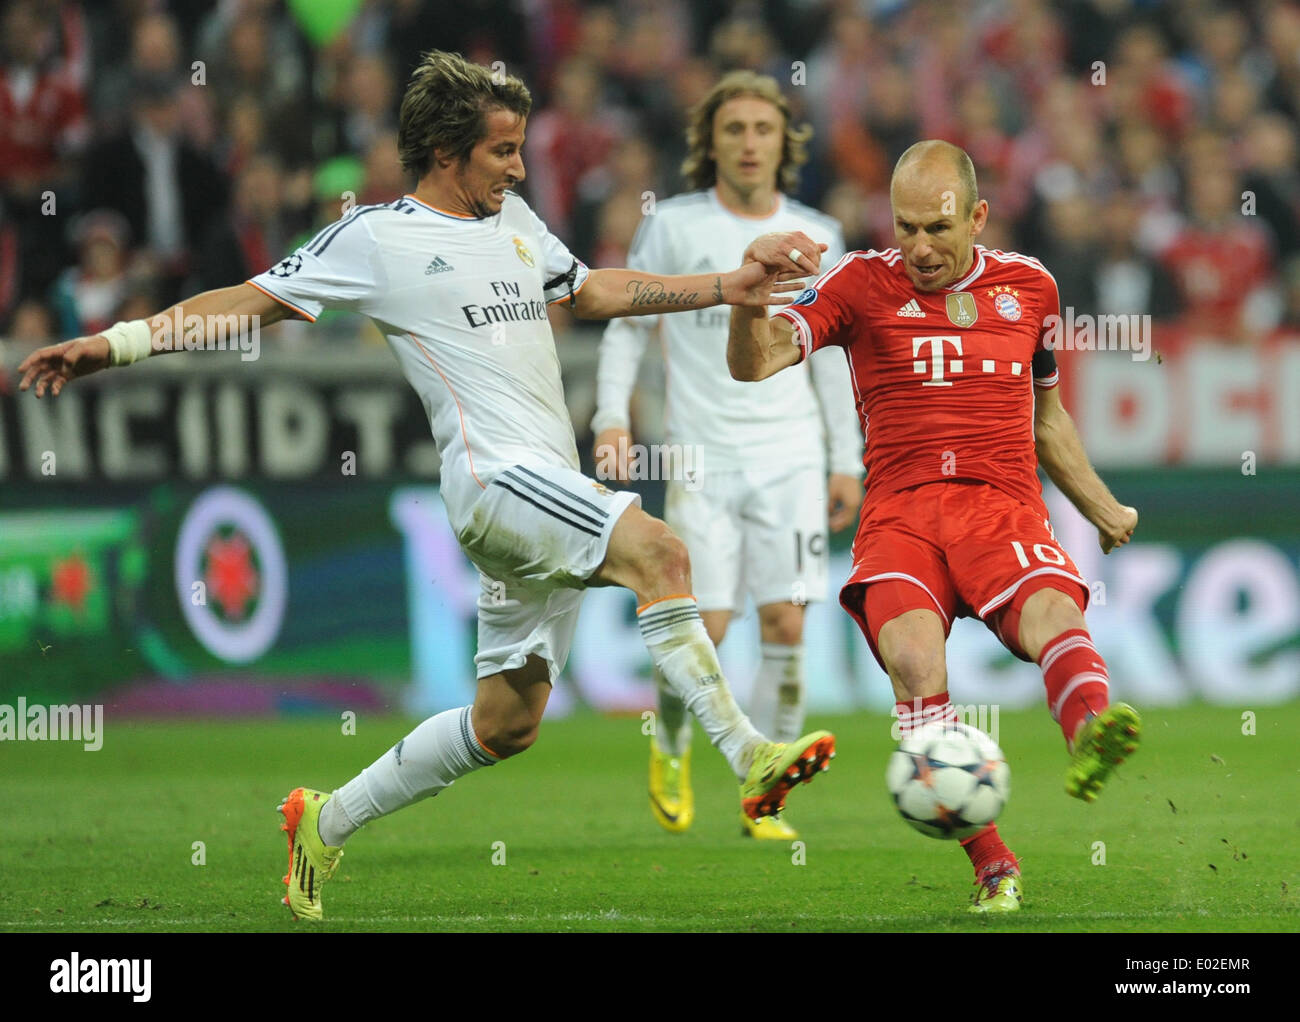 Munich, Germany. 28th Mar, 2014. Munich's Arjen Robben in action against Madrid's Fabio Coentrao during the Champions League semi-final second leg match between FC Bayern Munich and Real Madrid at Arena in Munich, Germany, 28 March 2014. Photo: Andreas Gebert/dpa/Alamy Live News Stock Photo